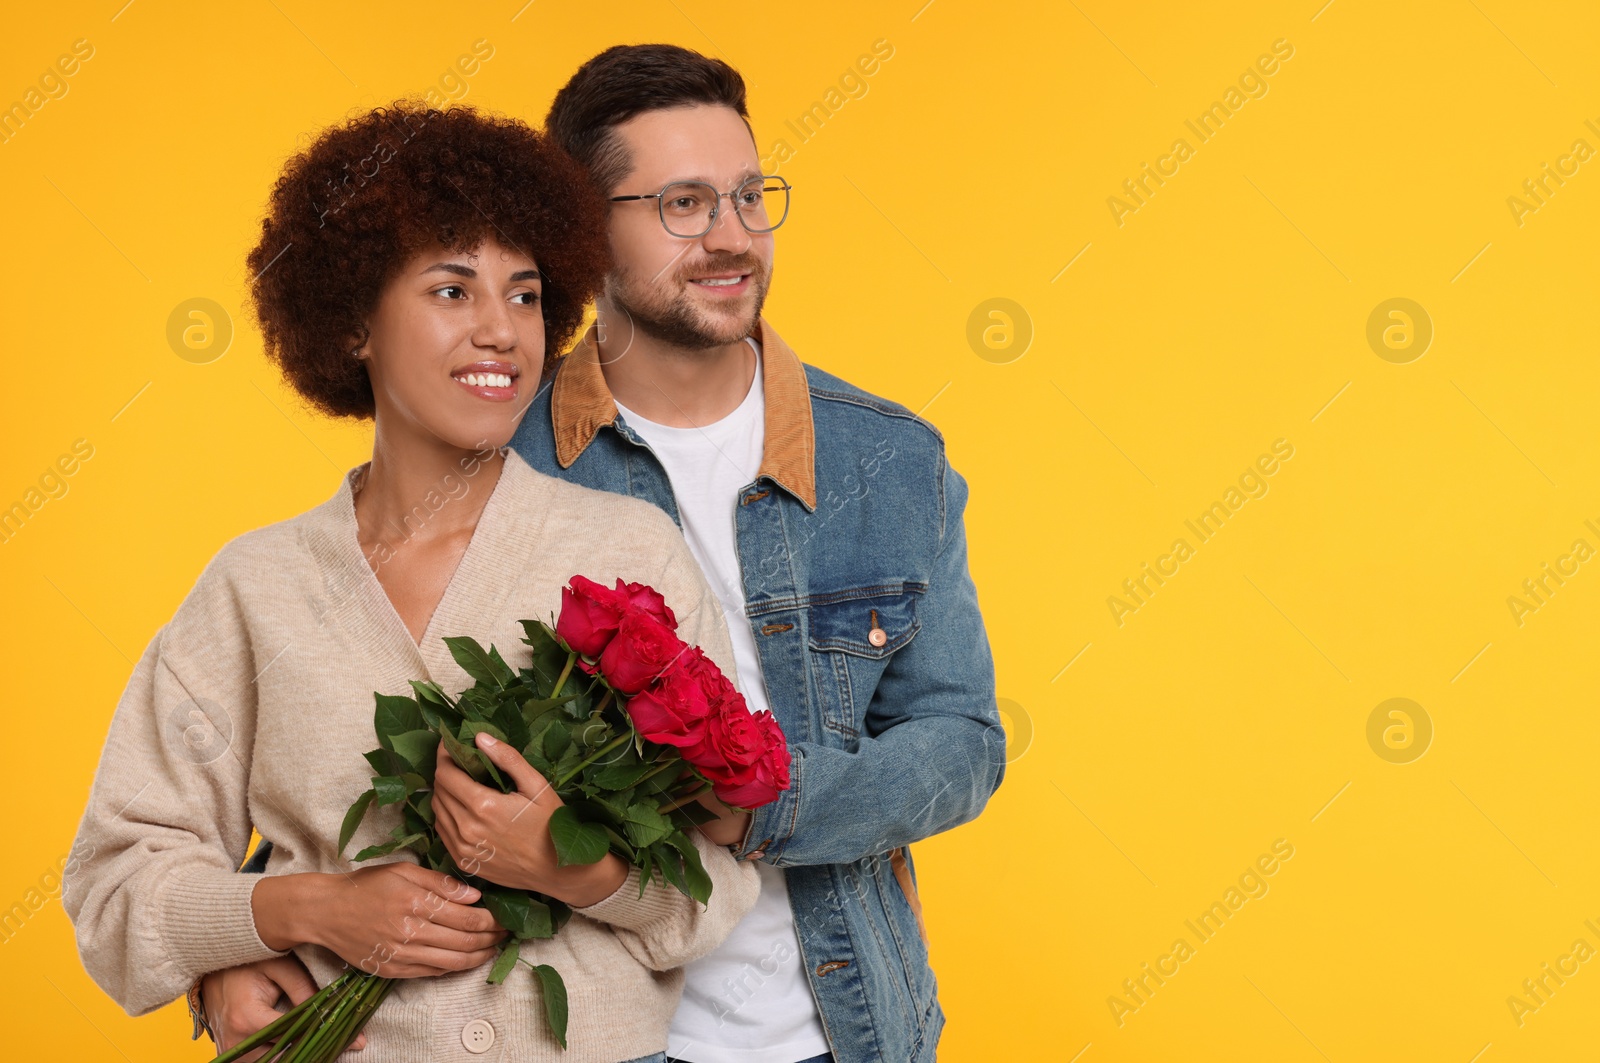 Photo of International dating. Happy couple with bouquet of roses on orange background, space for text